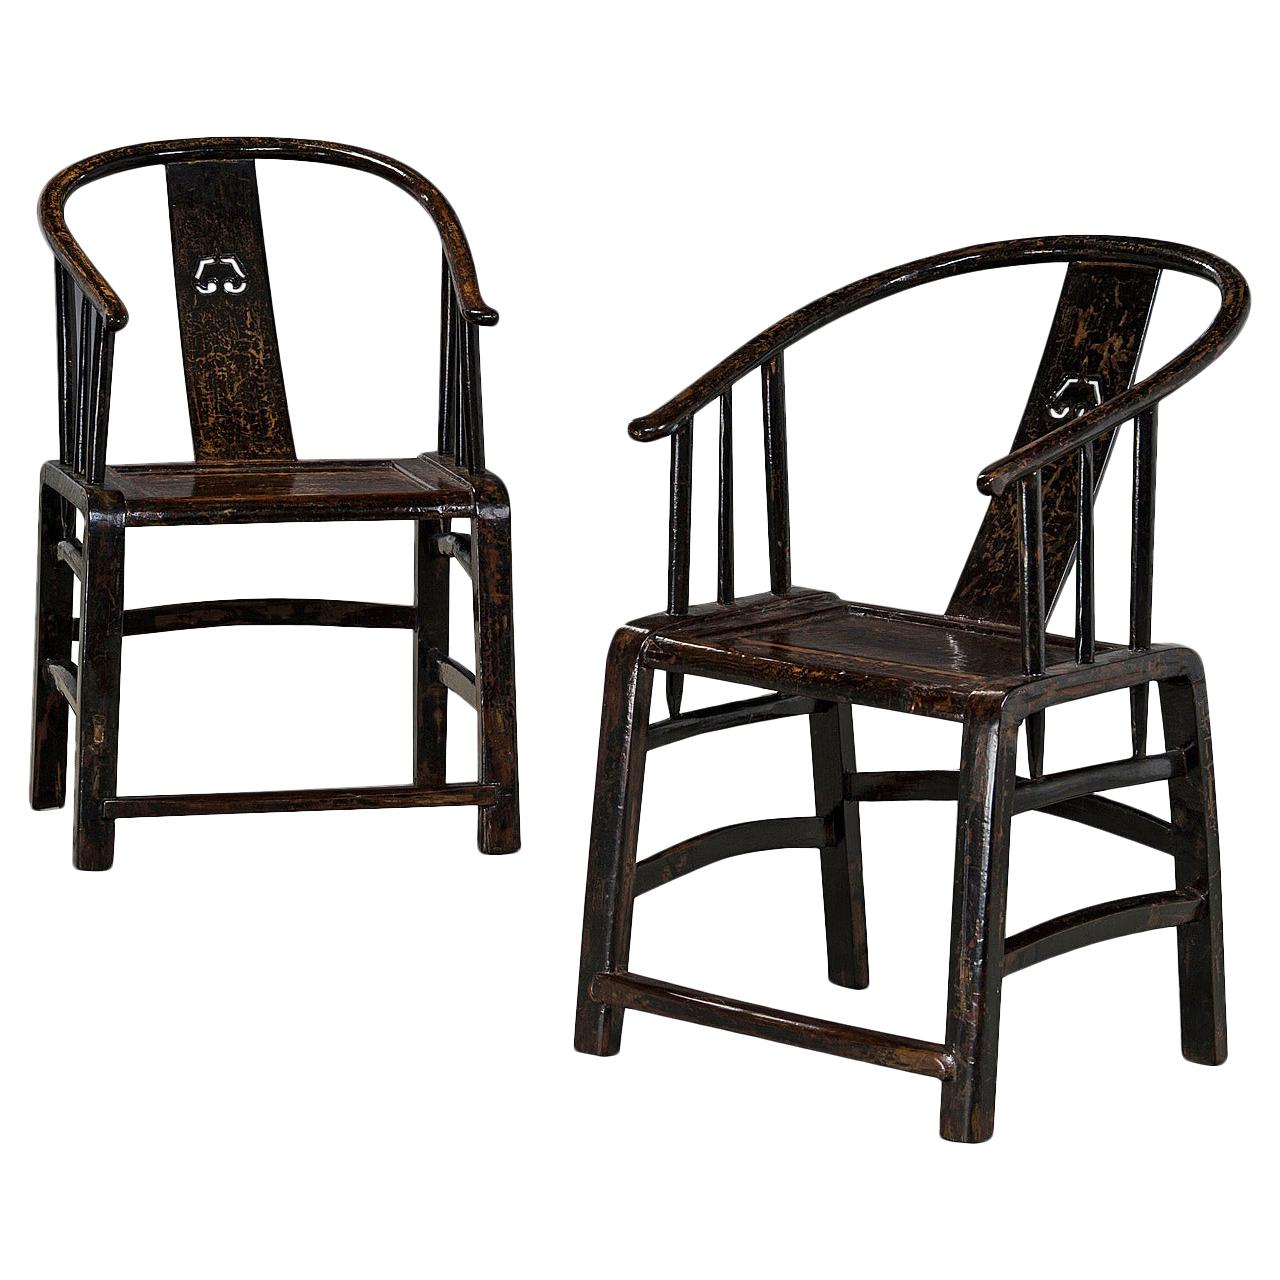 Pair of antique "Lazy Chairs" in Original Beautiful Black Lacquer